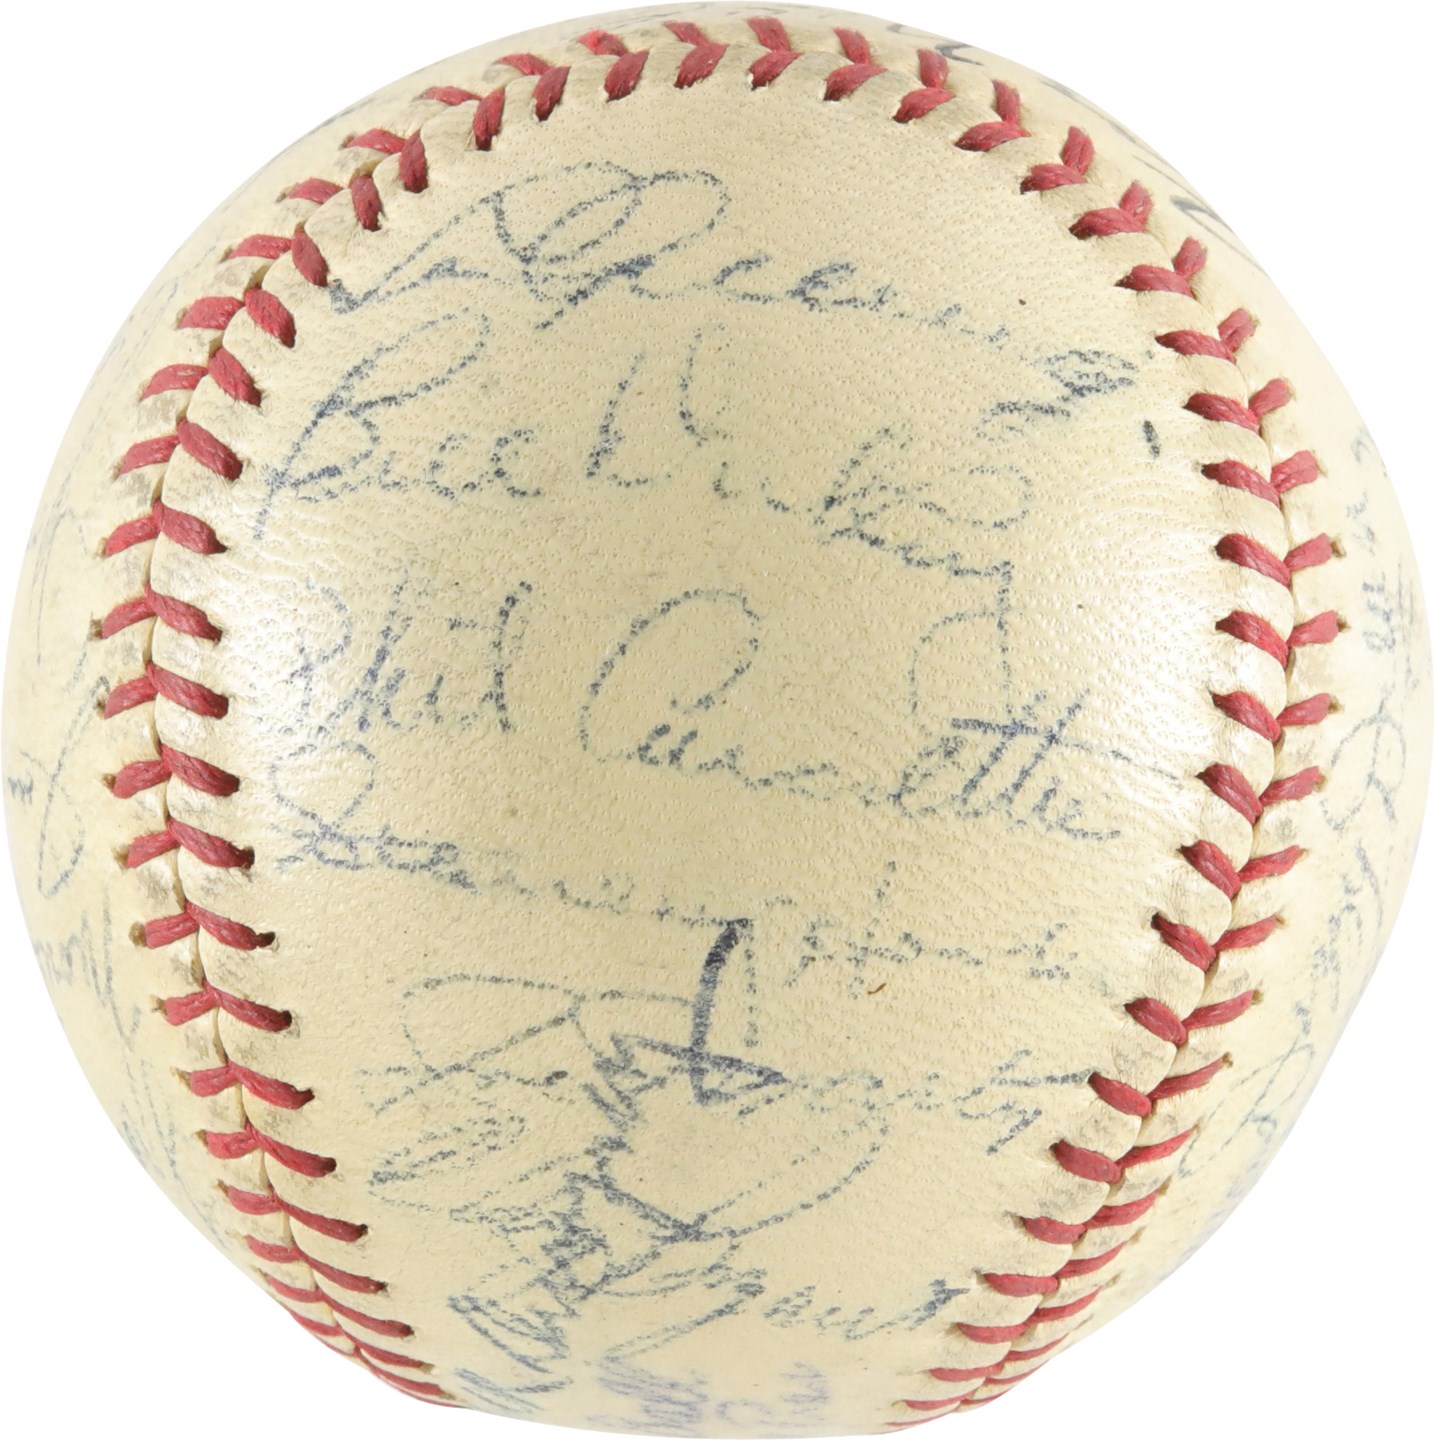 - 1938 New York Yankees World Champions Team-Signed Baseball with Gehrig & DiMaggio Plus Dizzy Dean and Other Cubs Players - Signed at the World Series (PSA)